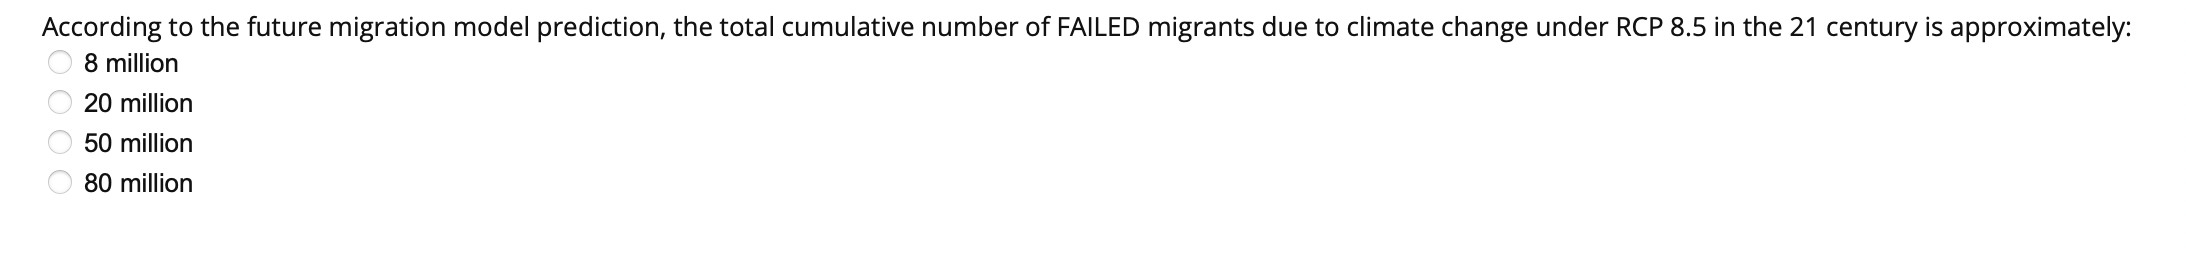 According to the future migration model prediction, the total cumulative number of FAILED migrants due to climate change unde